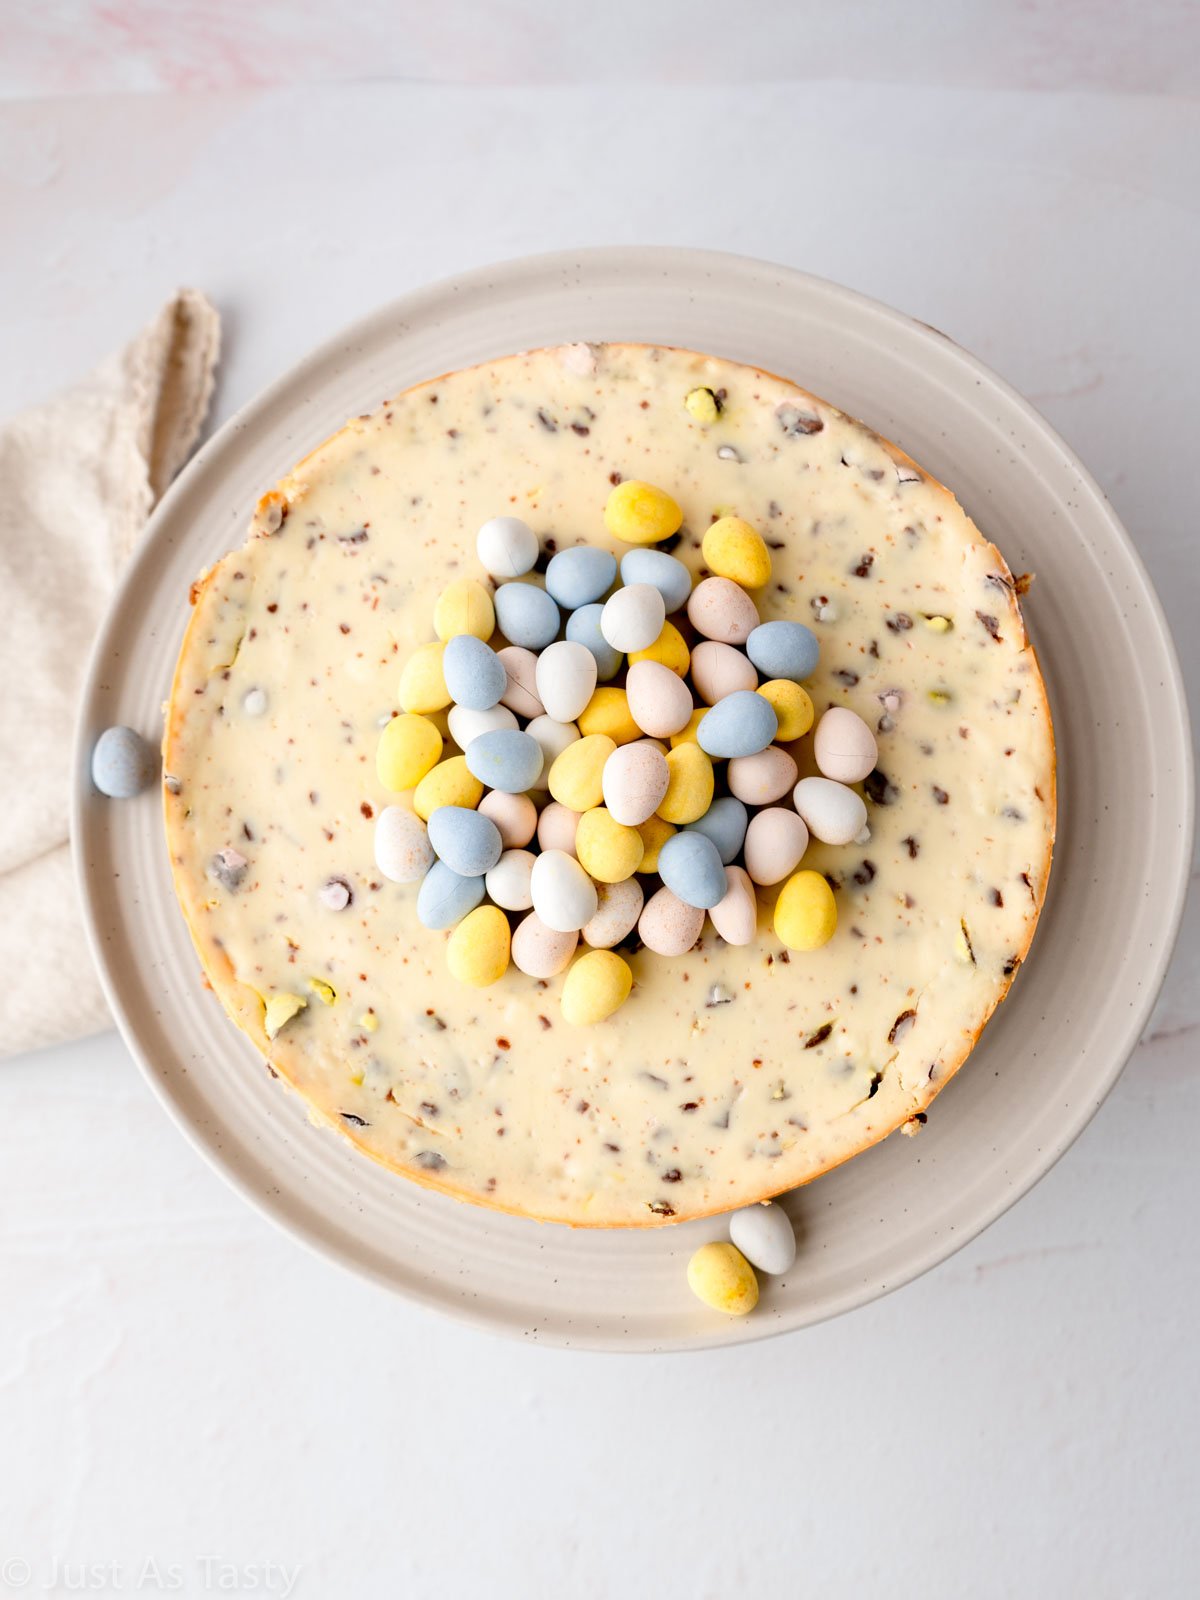 Cheesecake topped with pastel chocolate mini eggs.